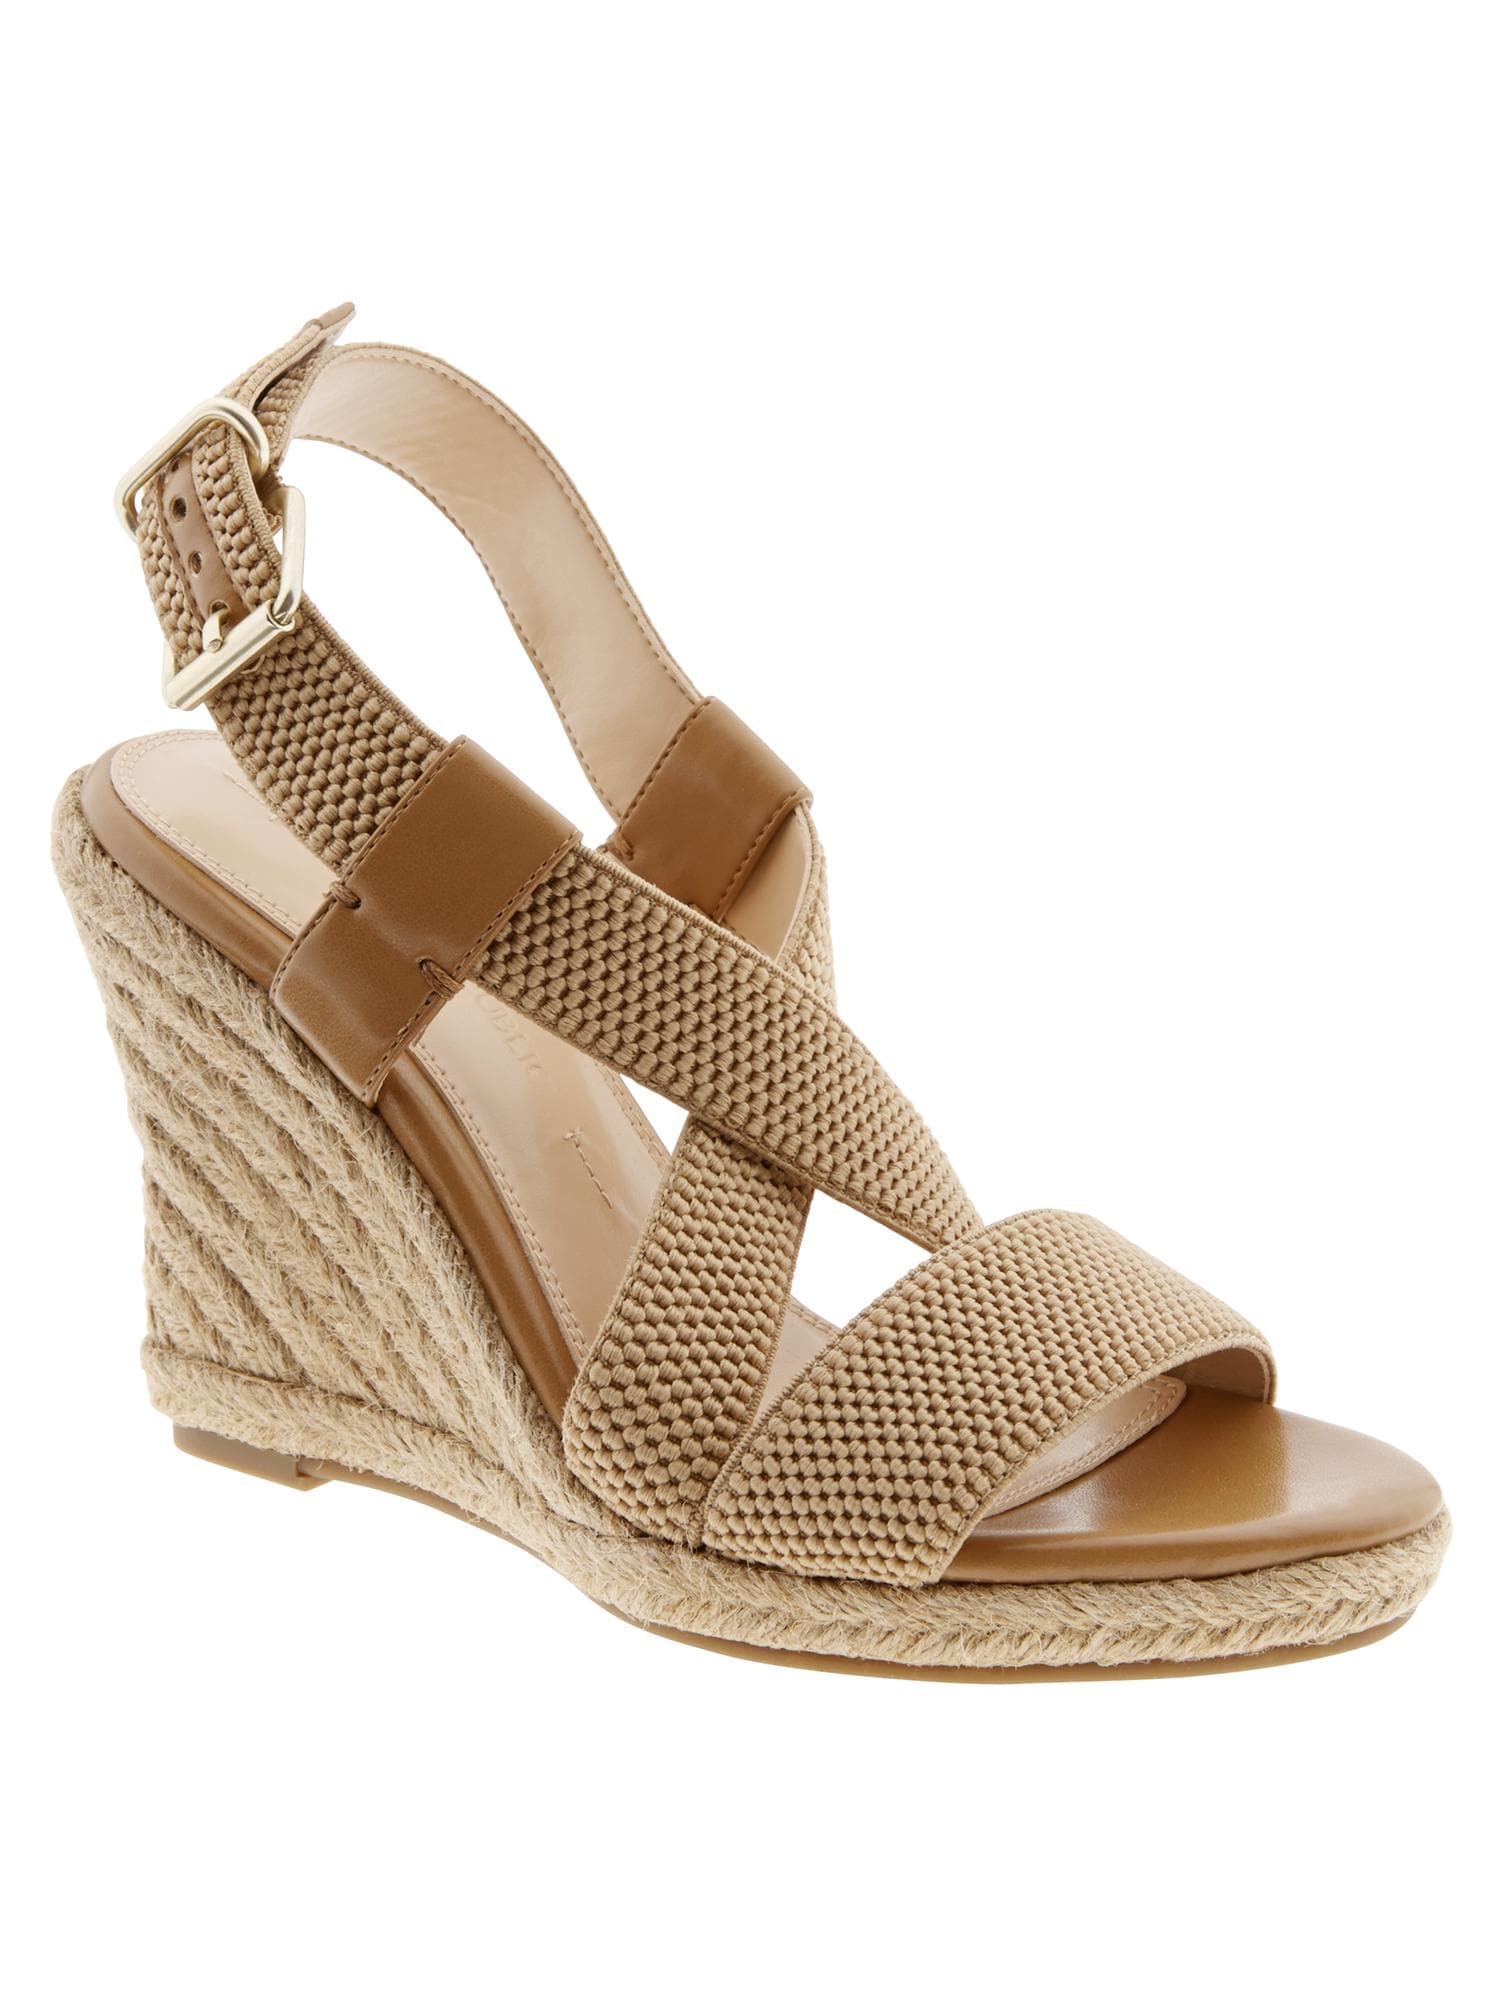 Pipperr Espadrille Wedge